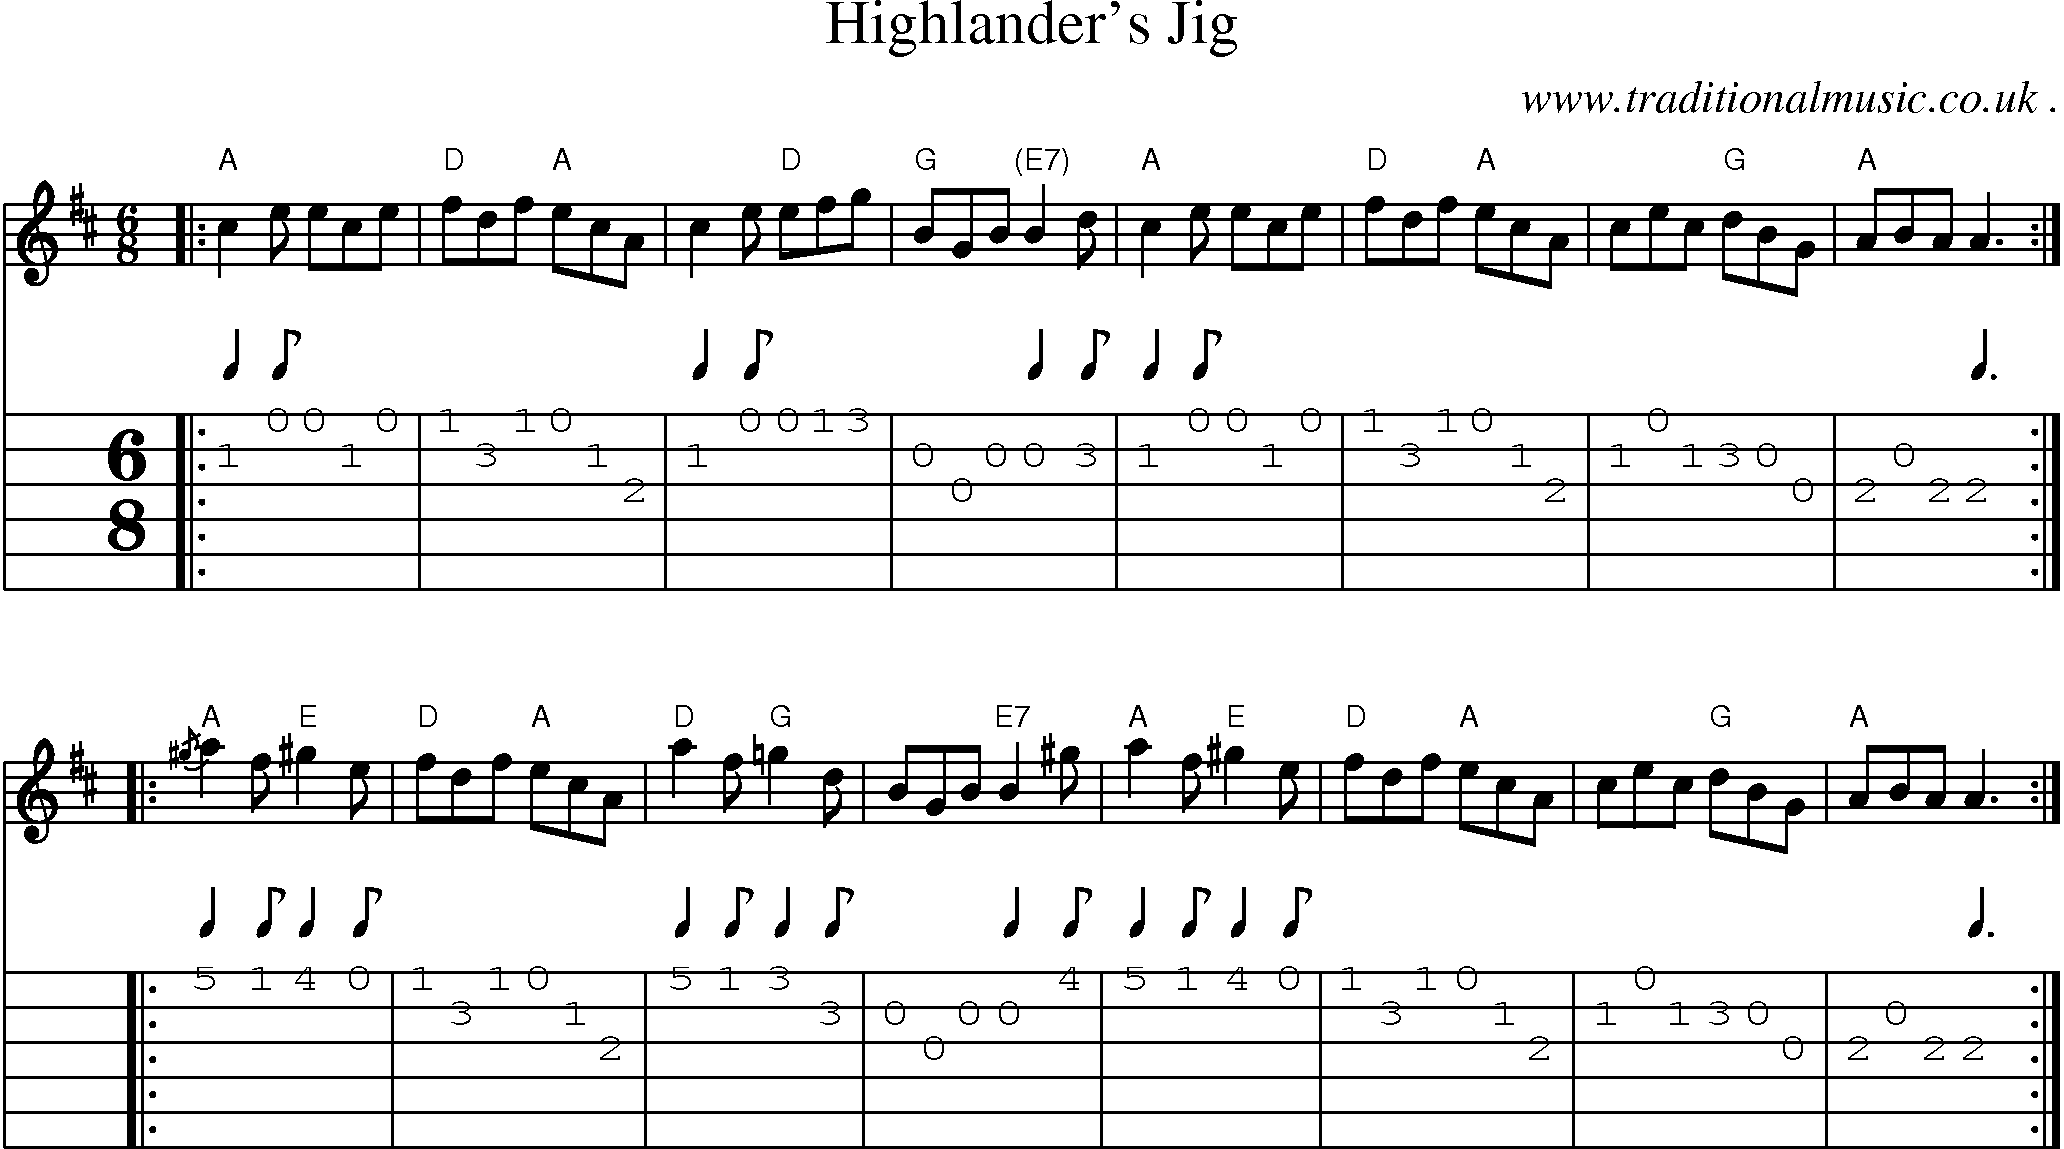 Sheet-music  score, Chords and Guitar Tabs for Highlanders Jig